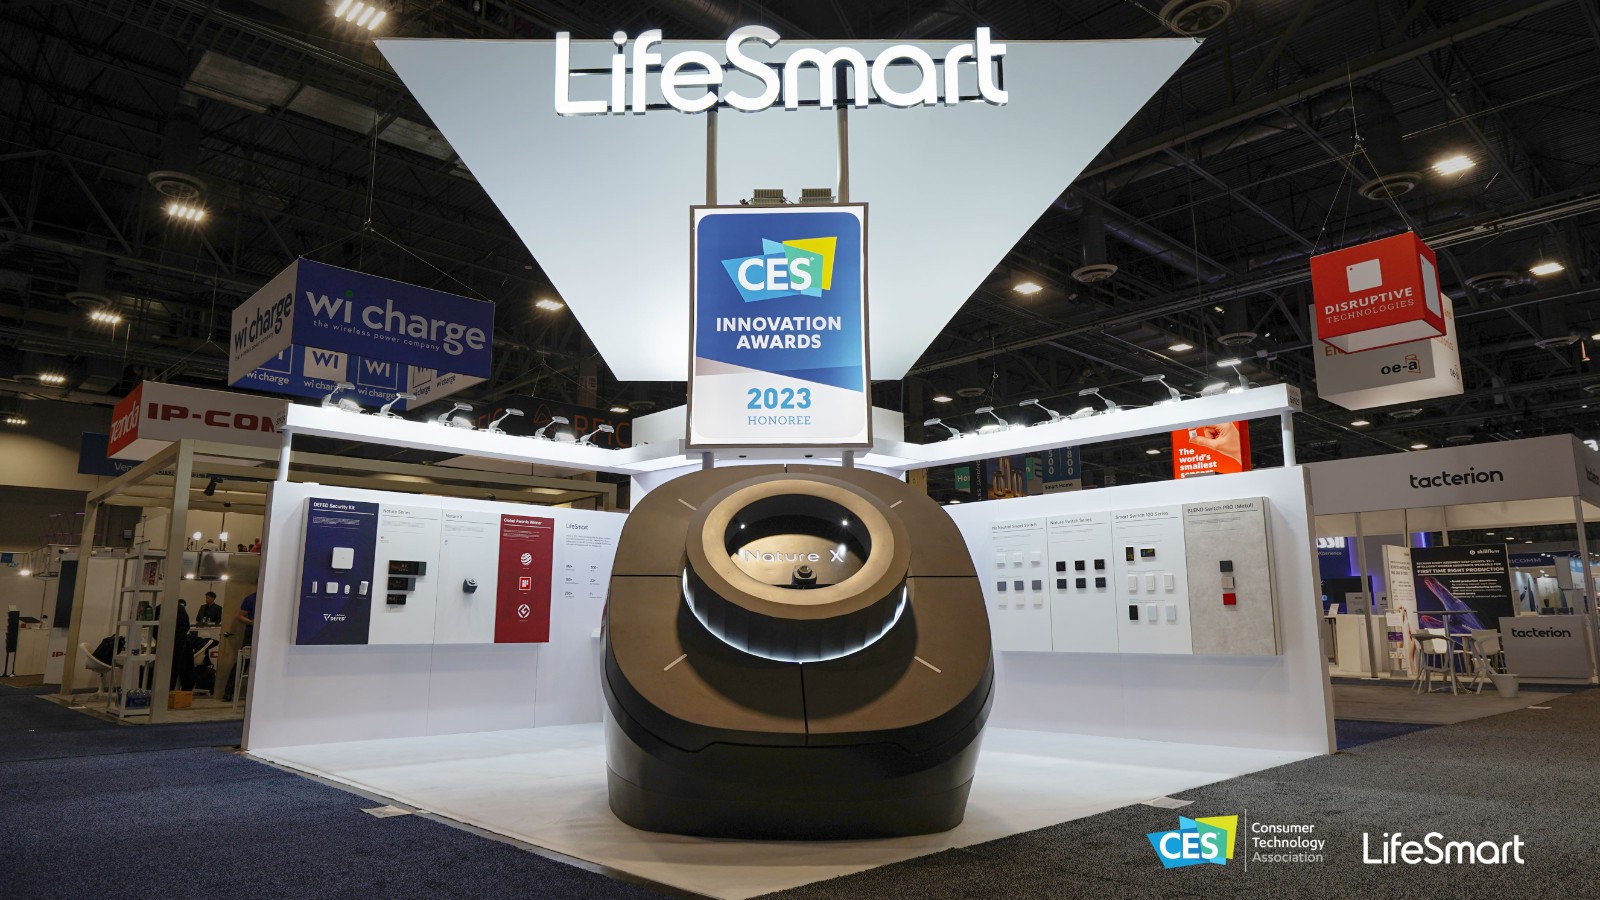 LifeSmart's Nature X and Cololight Steal the Show at CES2023